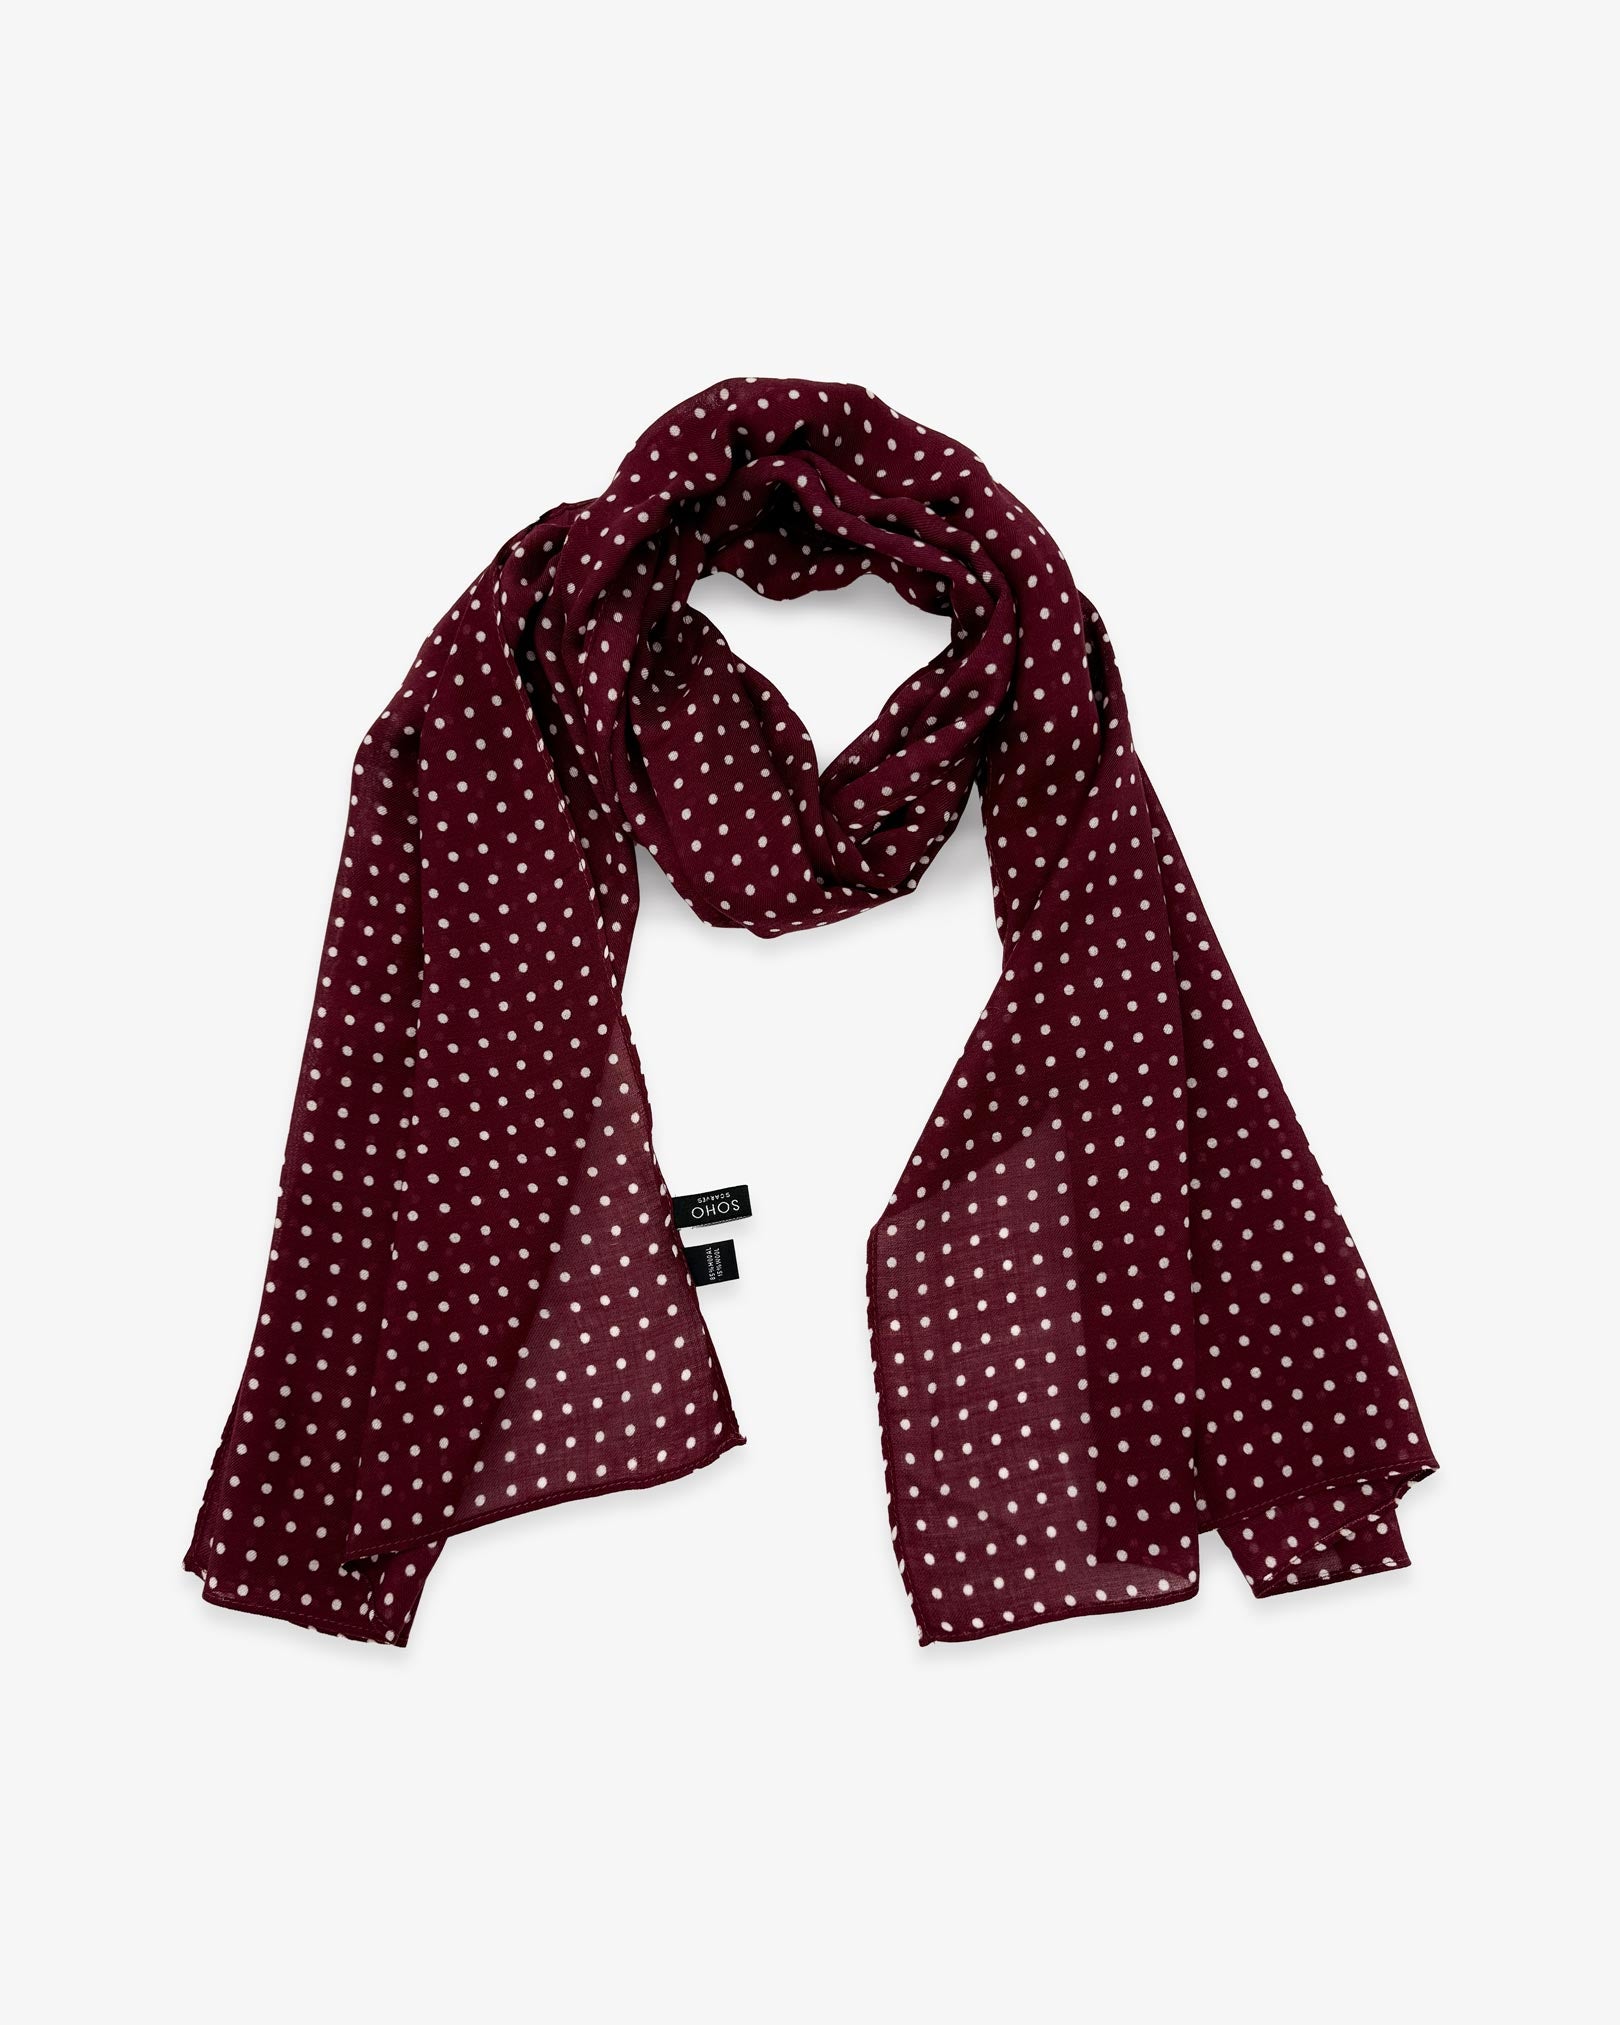 The Sapporo wide scarf unravelled and looped in the middle, demonstrating the longer scarf length and polka dot patterns.